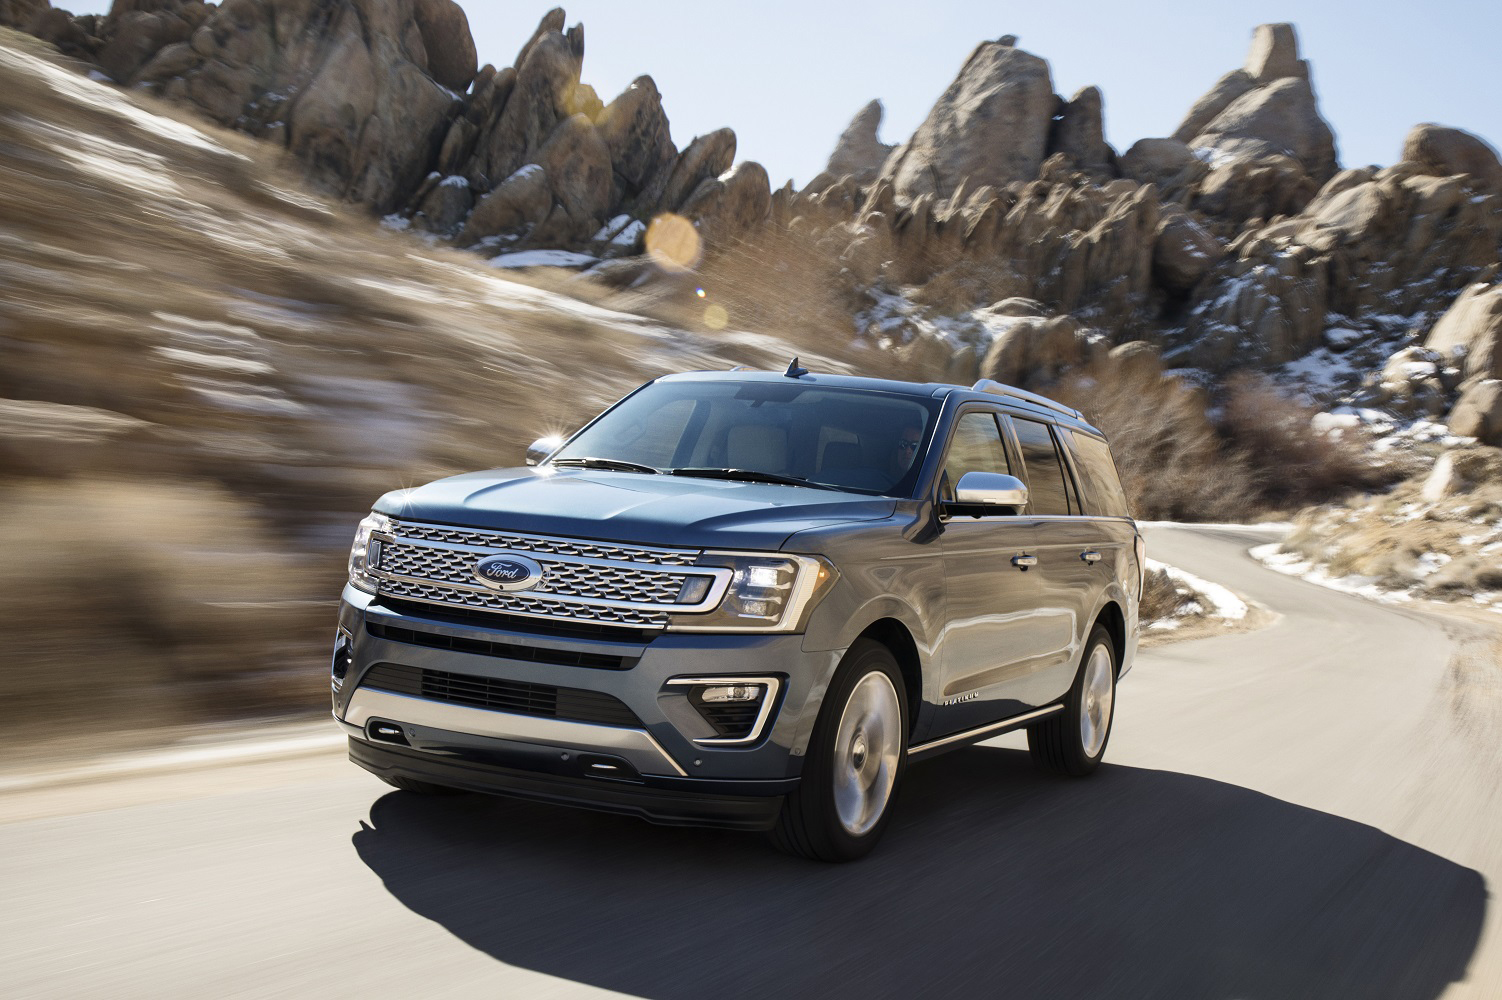 2018 Ford Expedition | News, Specs, Performance, Features, Pictures |  Digital Trends